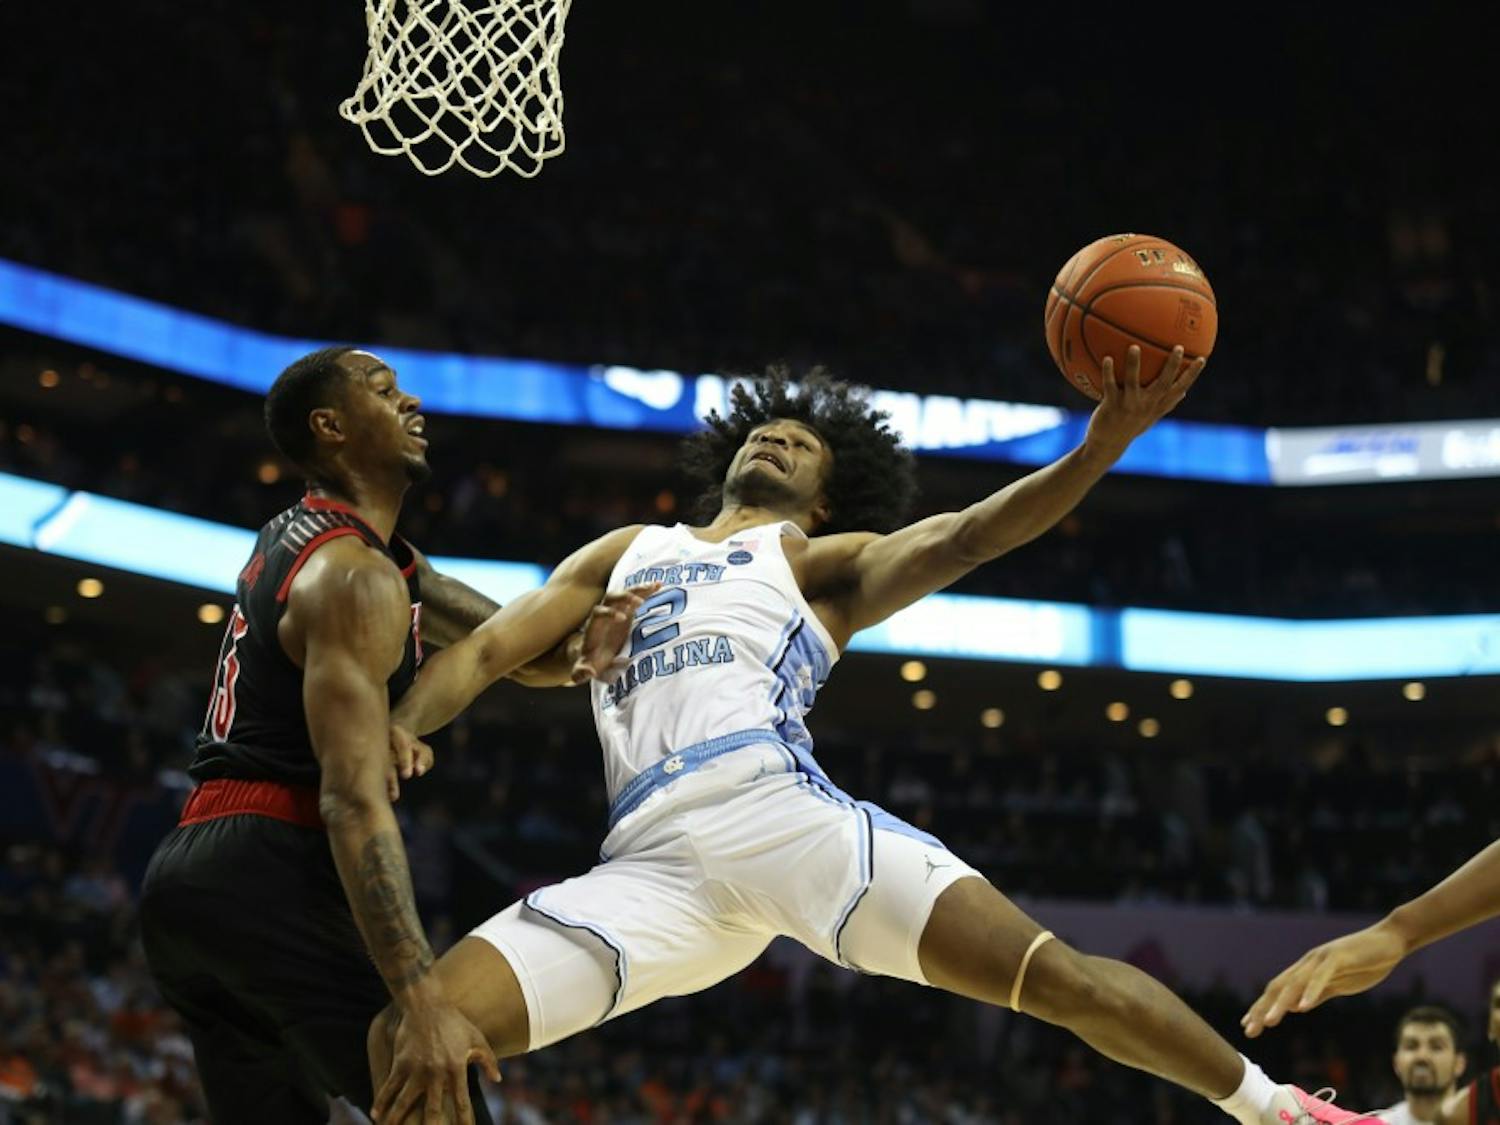 UNC defeated Louisville 83-70 in the quarterfinals of the ACC Tournament at the Spectrum Center in Charlotte, N.C. on Thursday, March 14, 2019.&nbsp;